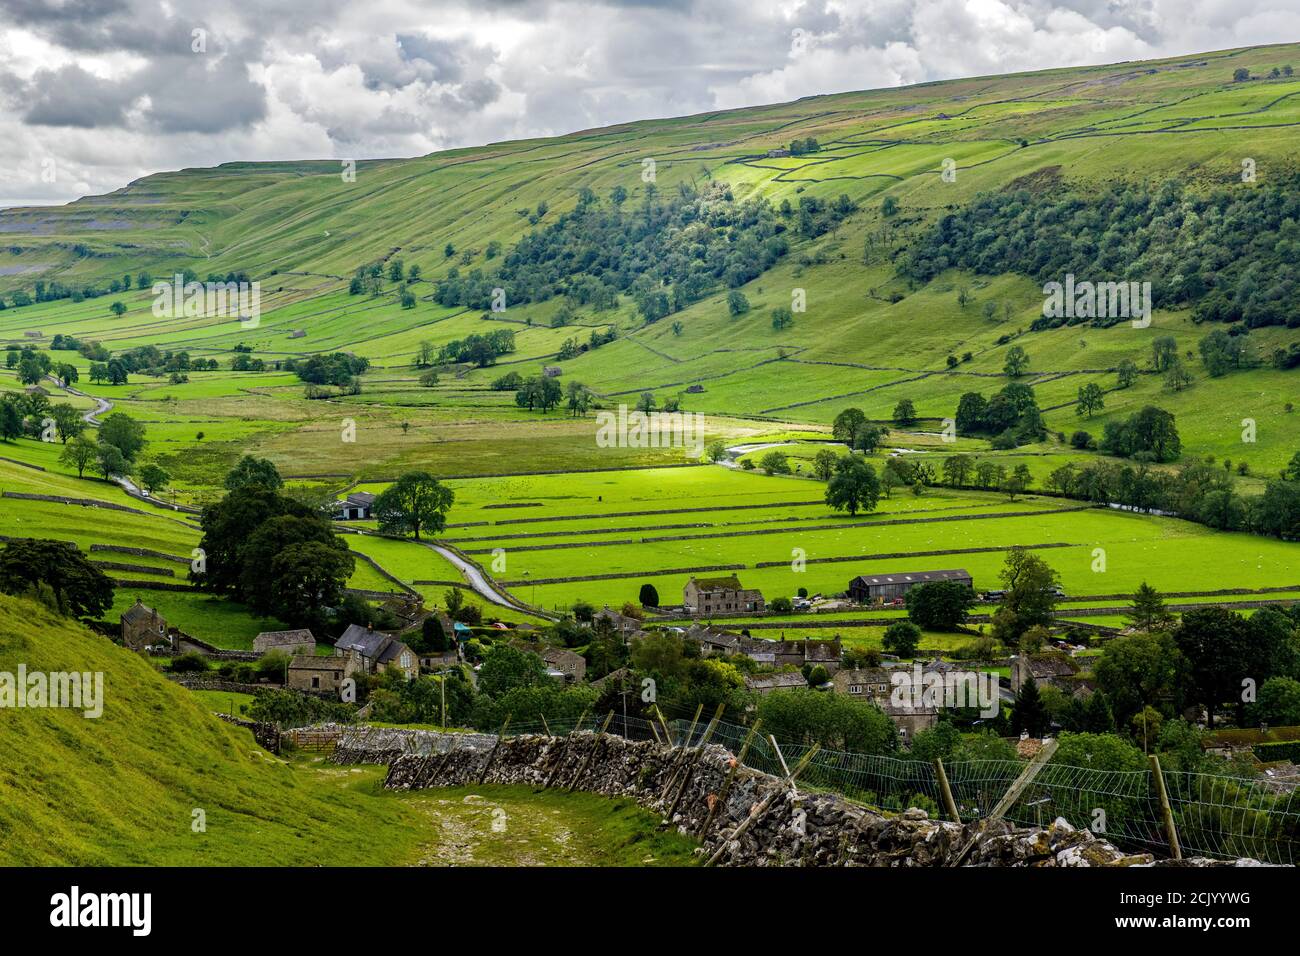 Looking Down on Starbotton in the Upper Wharfedale valley in the Yorkshire Dales National Park, North West Yorkshire on a September Day. Stock Photo